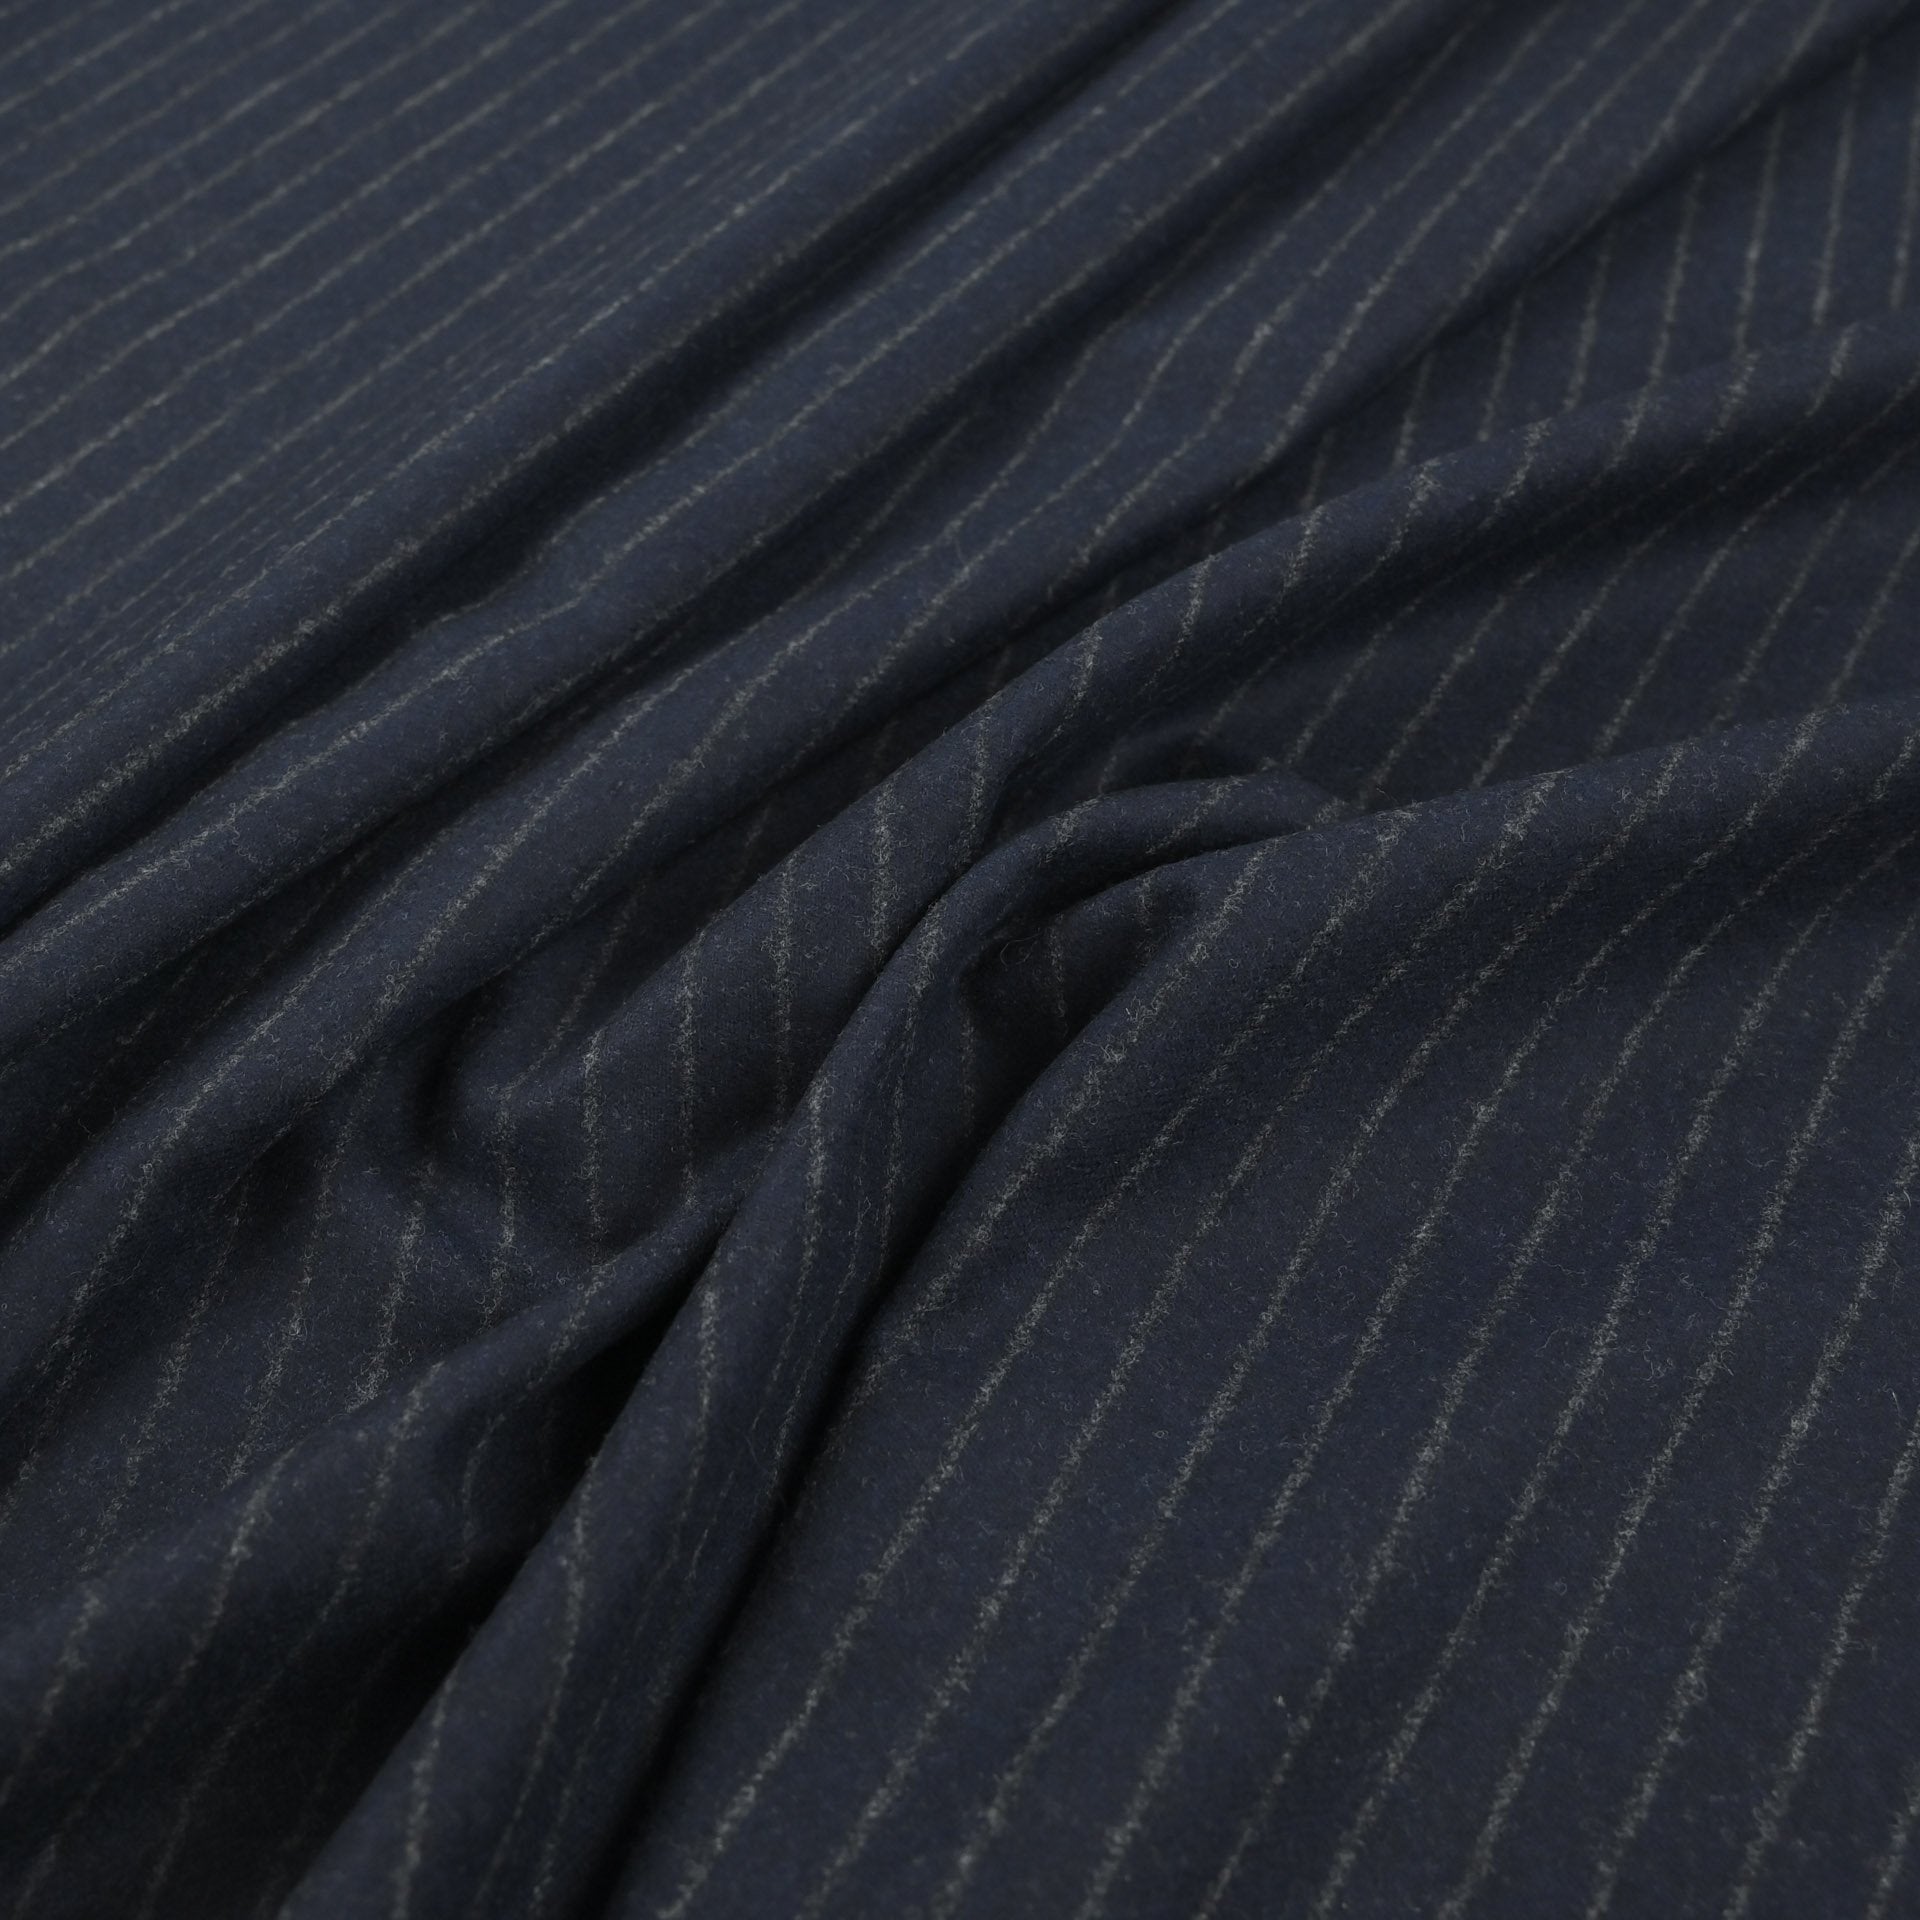 Navy Striped Suiting Flannel 3215